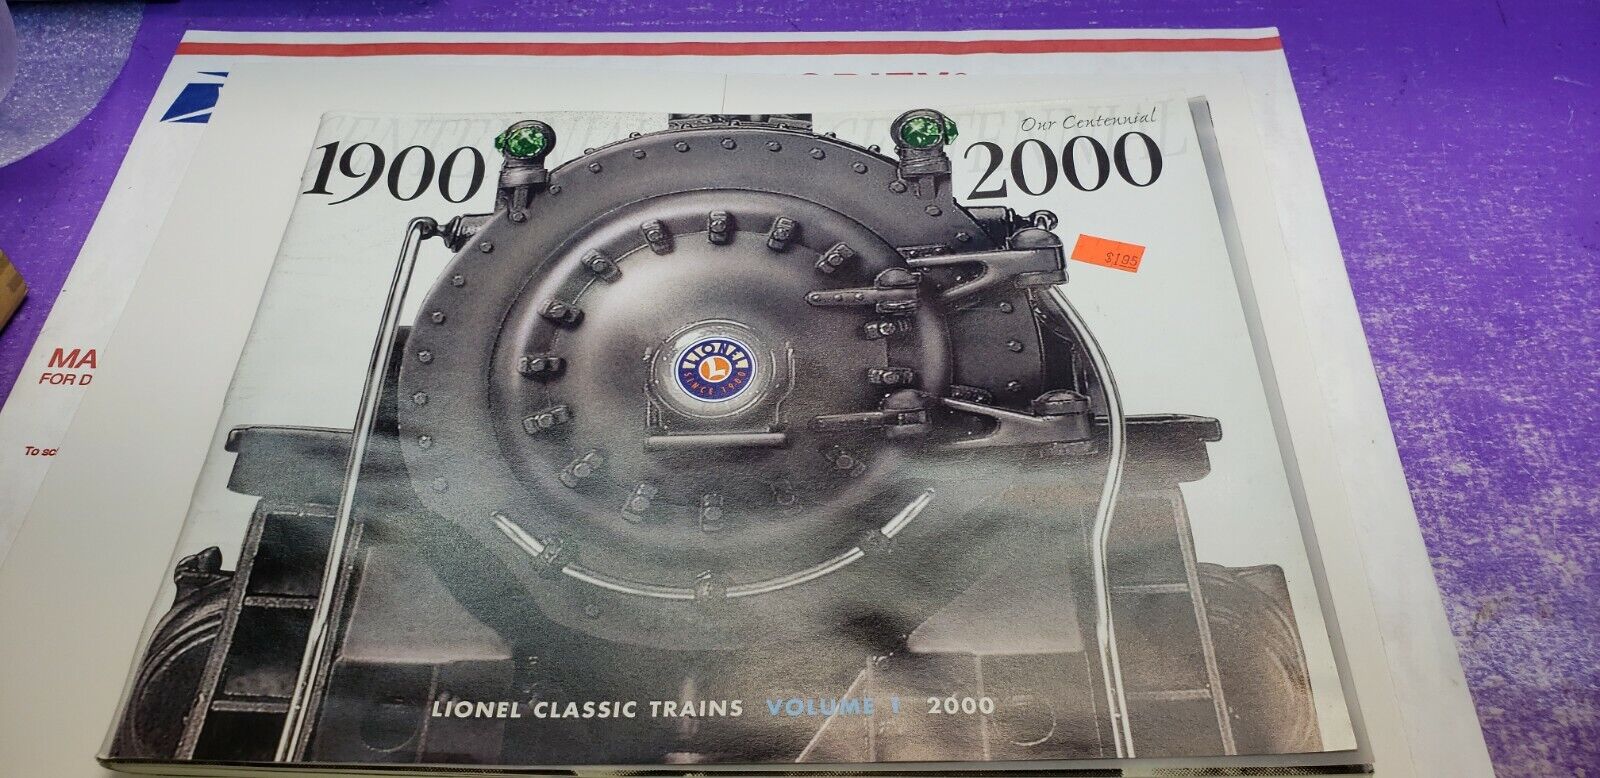 USED GOOD CONDITION 1999 LIONEL CLASSIC CATALOG TRAINS Max 51% OFF Cheap SALE Start 3 VOLUME